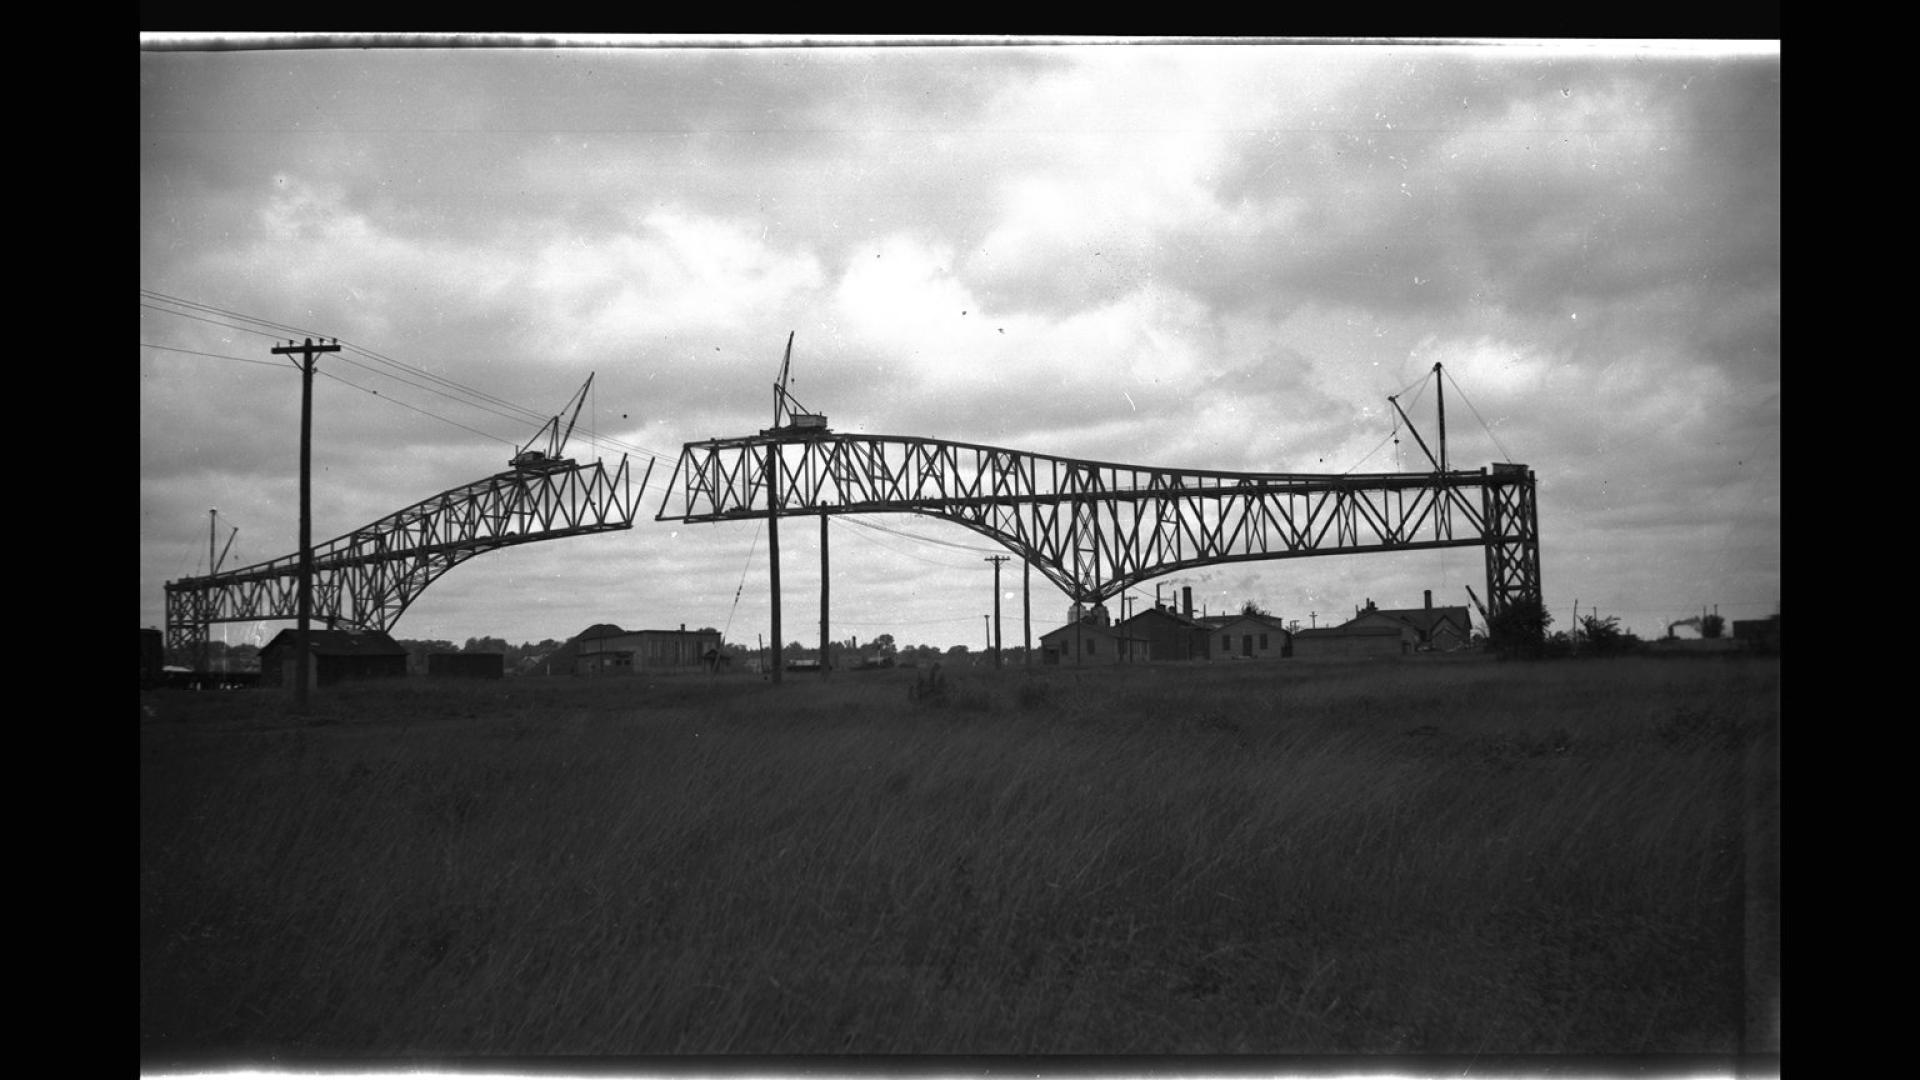 Silhouette of bridge under construction. There are clouds in the background. 